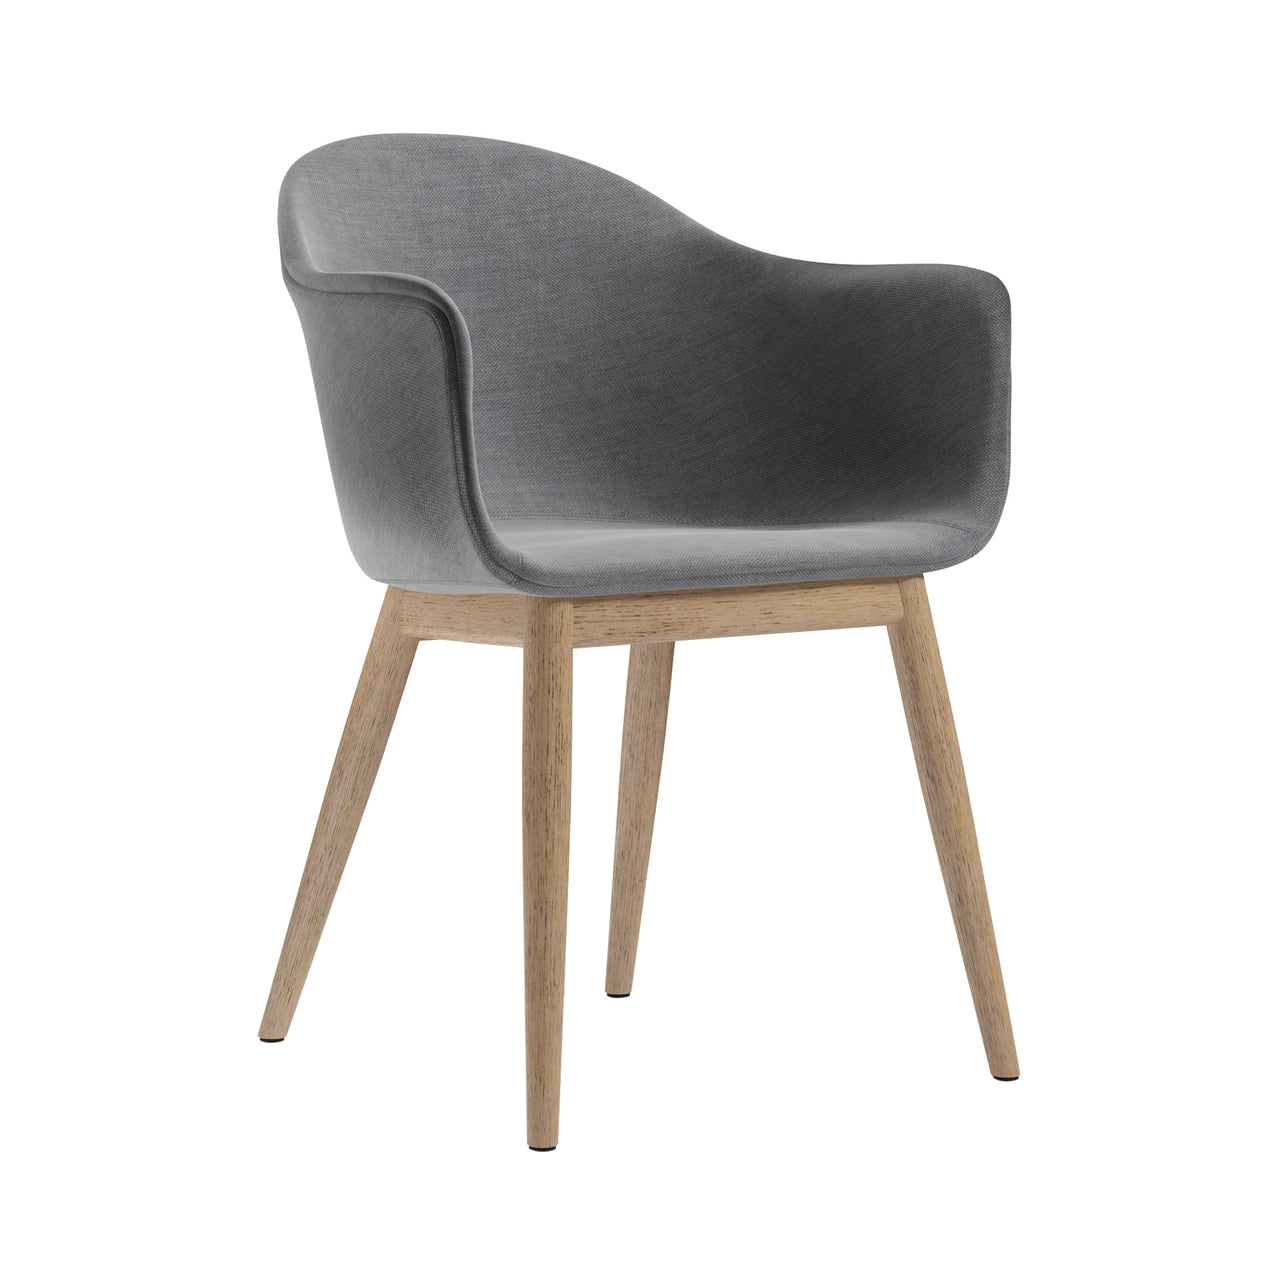 Harbour Dining Chair: Wood Base Upholstered + Natural Oak + Fiord2 751